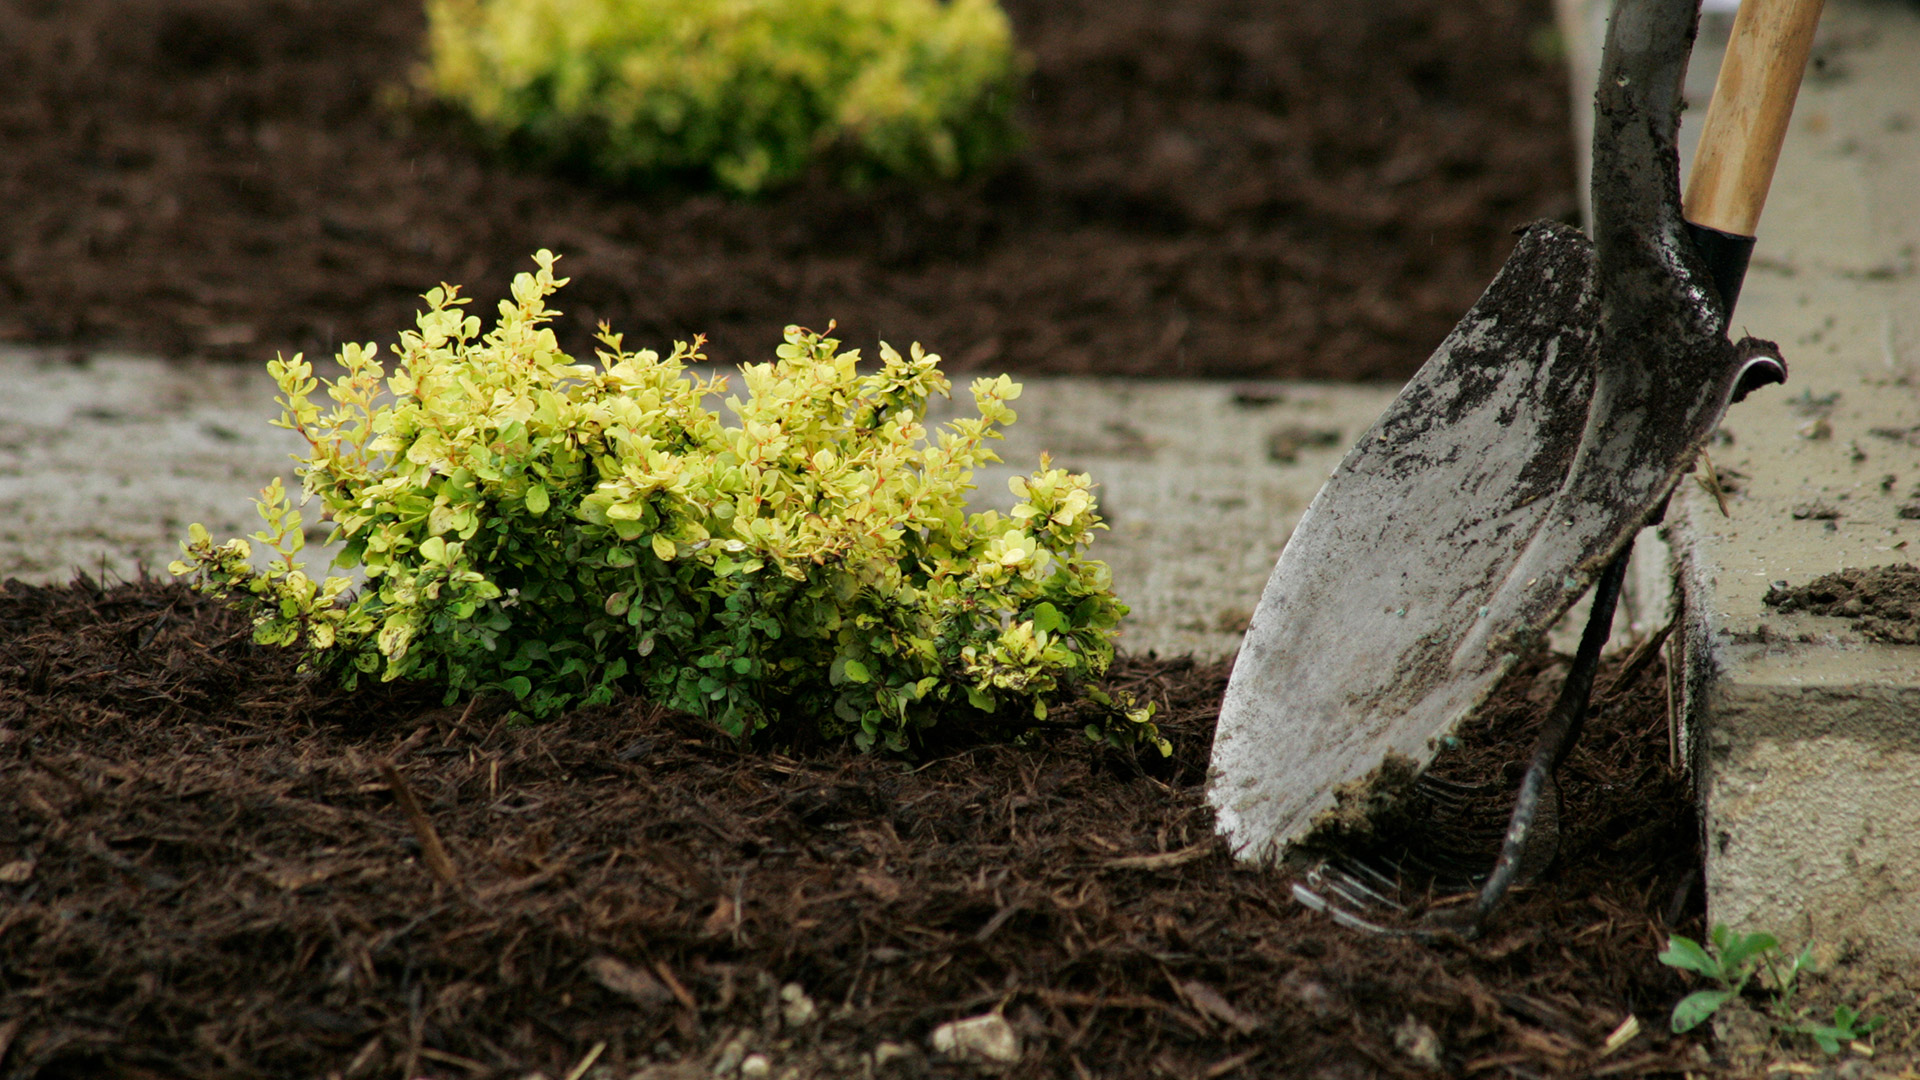 How Often Should You Be Replenishing the Mulch in Your Garden?